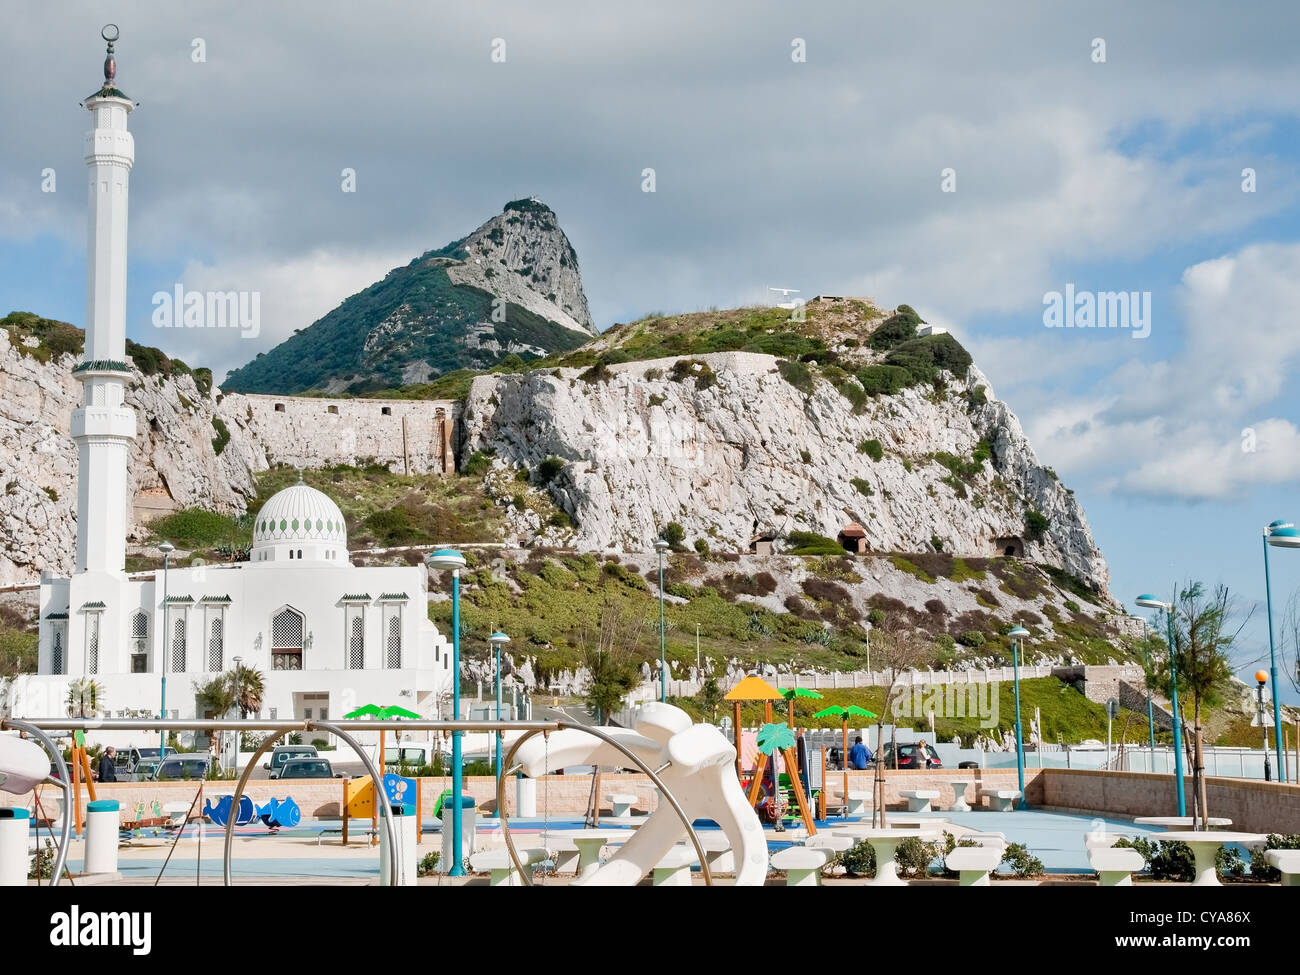 The Rock of Gibraltar seen from its southern tip at Europa Point. Newly-built mosque and children's play area in the foreground. Stock Photo